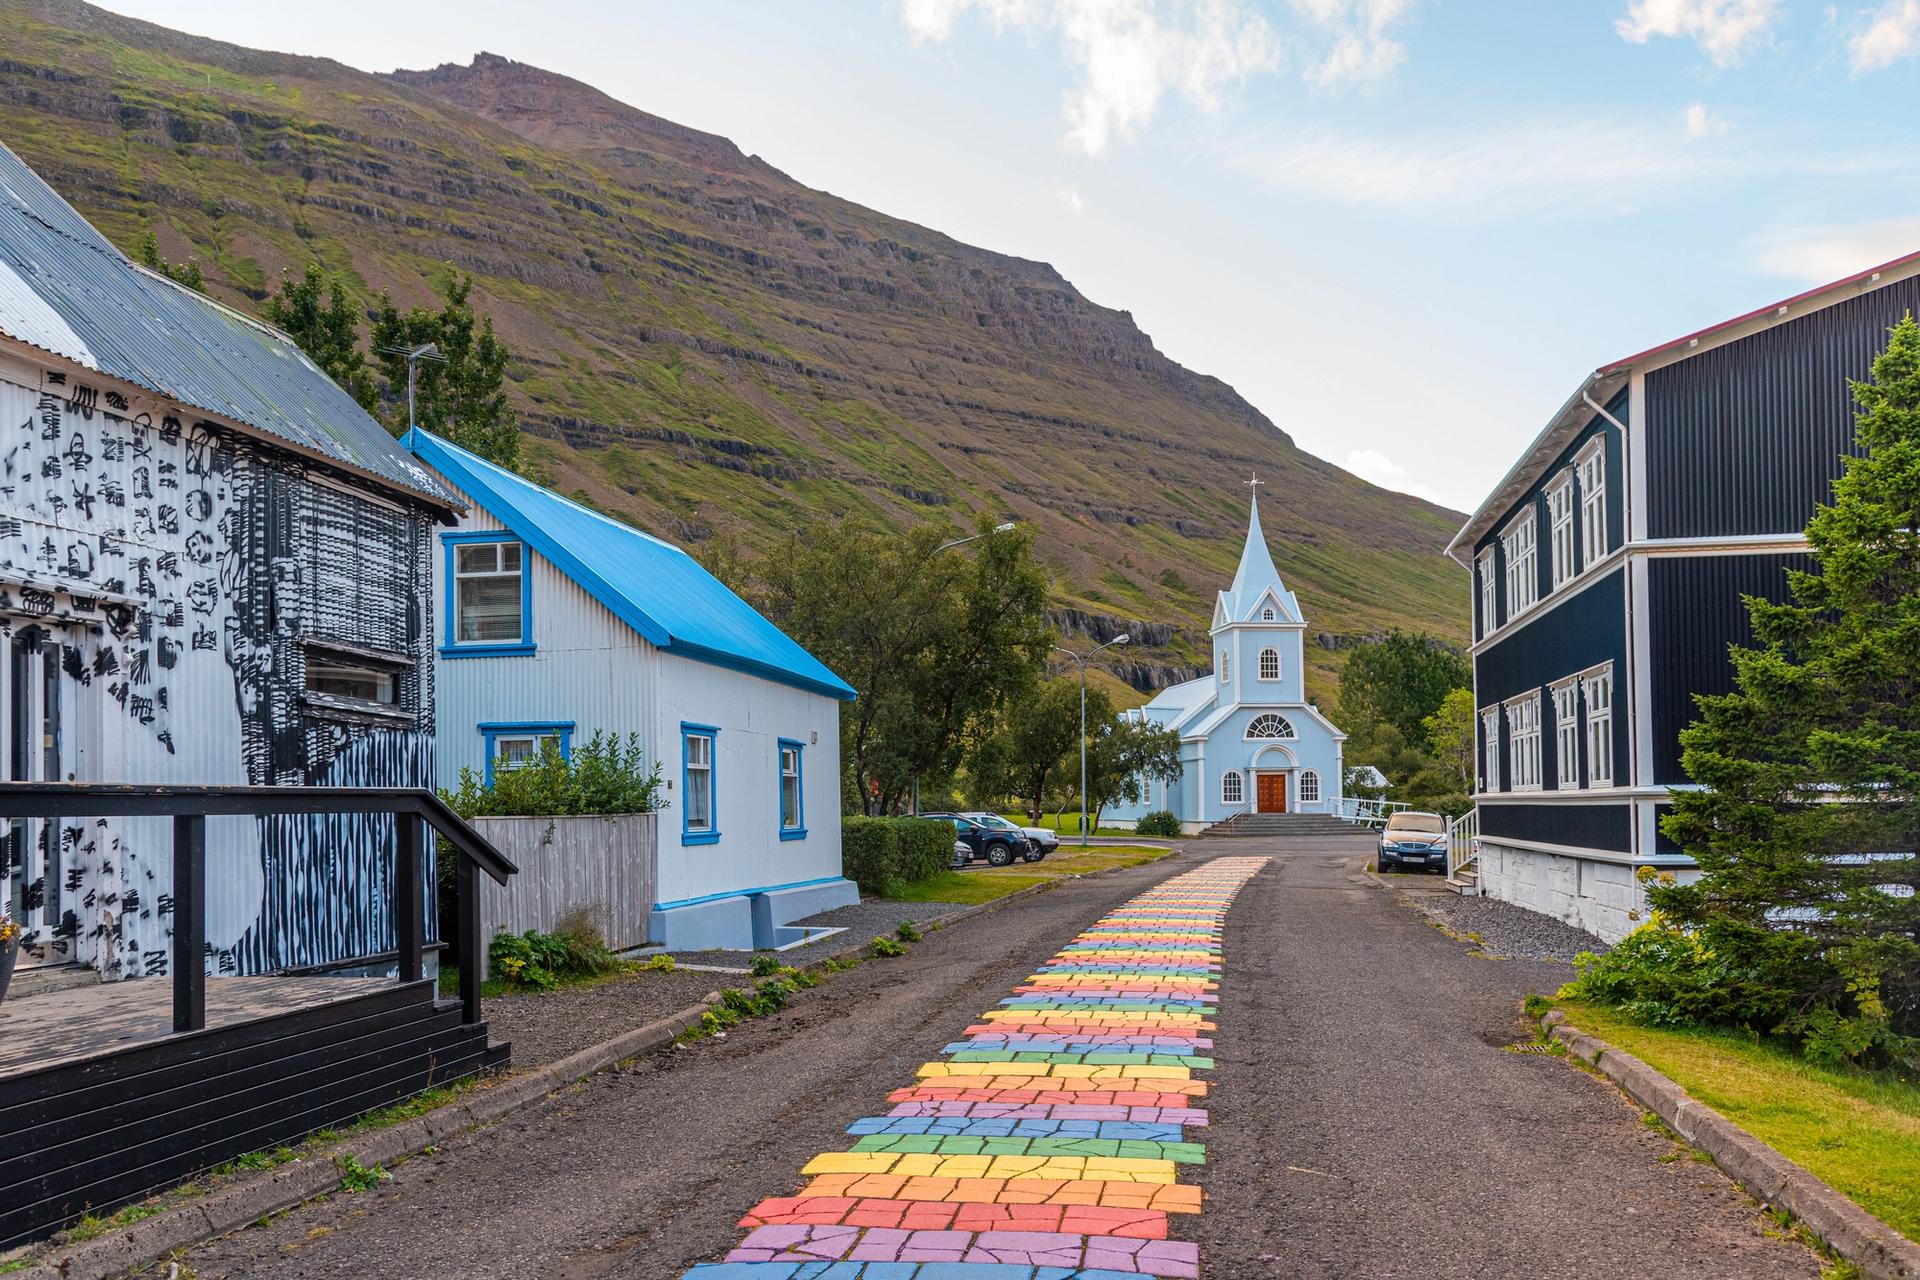 The vibrant Rainbow Road in Seydisfjordur, Iceland, stretching towards a quaint town set against mountainous scenery.